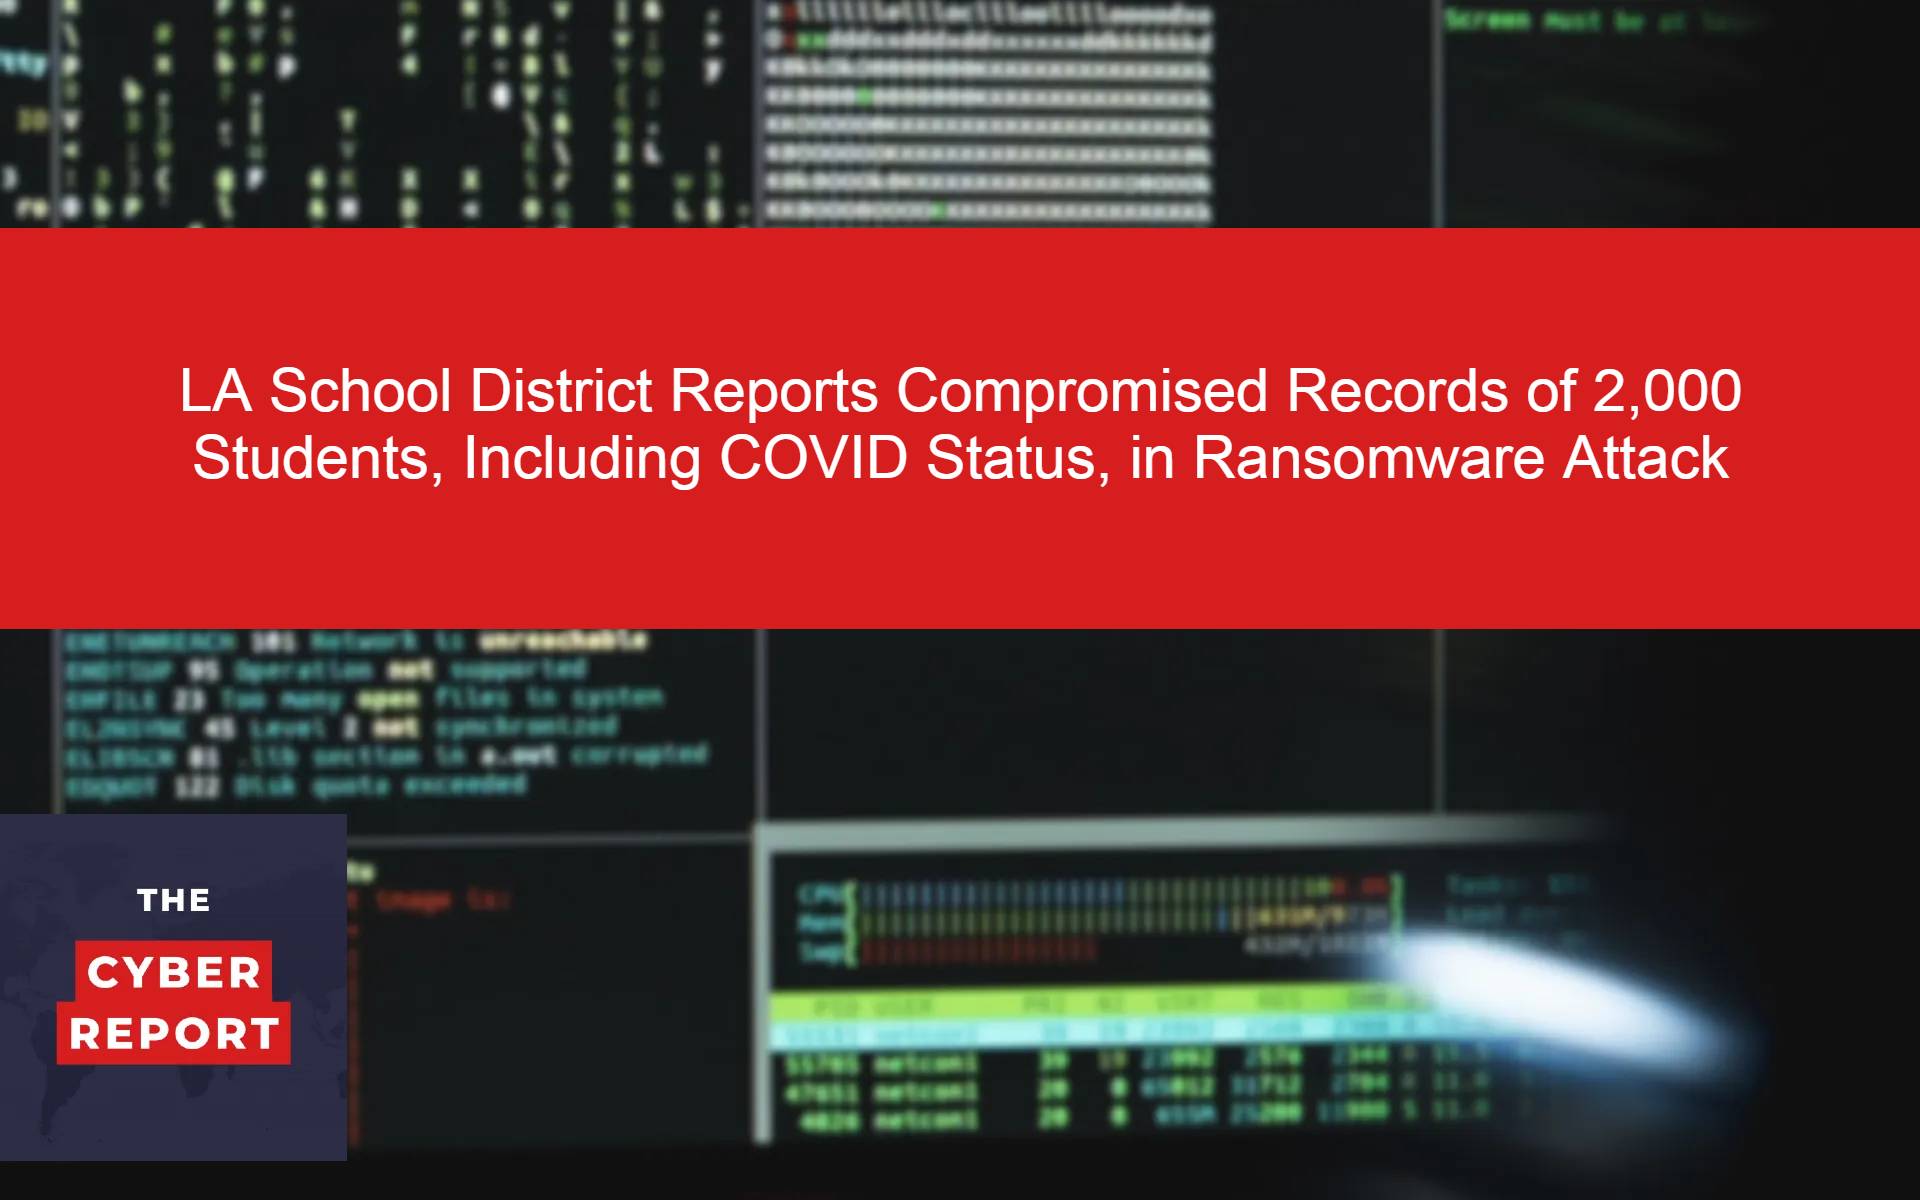 LA School District Reports Compromised Records of 2,000 Students, Including COVID Status, in Ransomware Attack